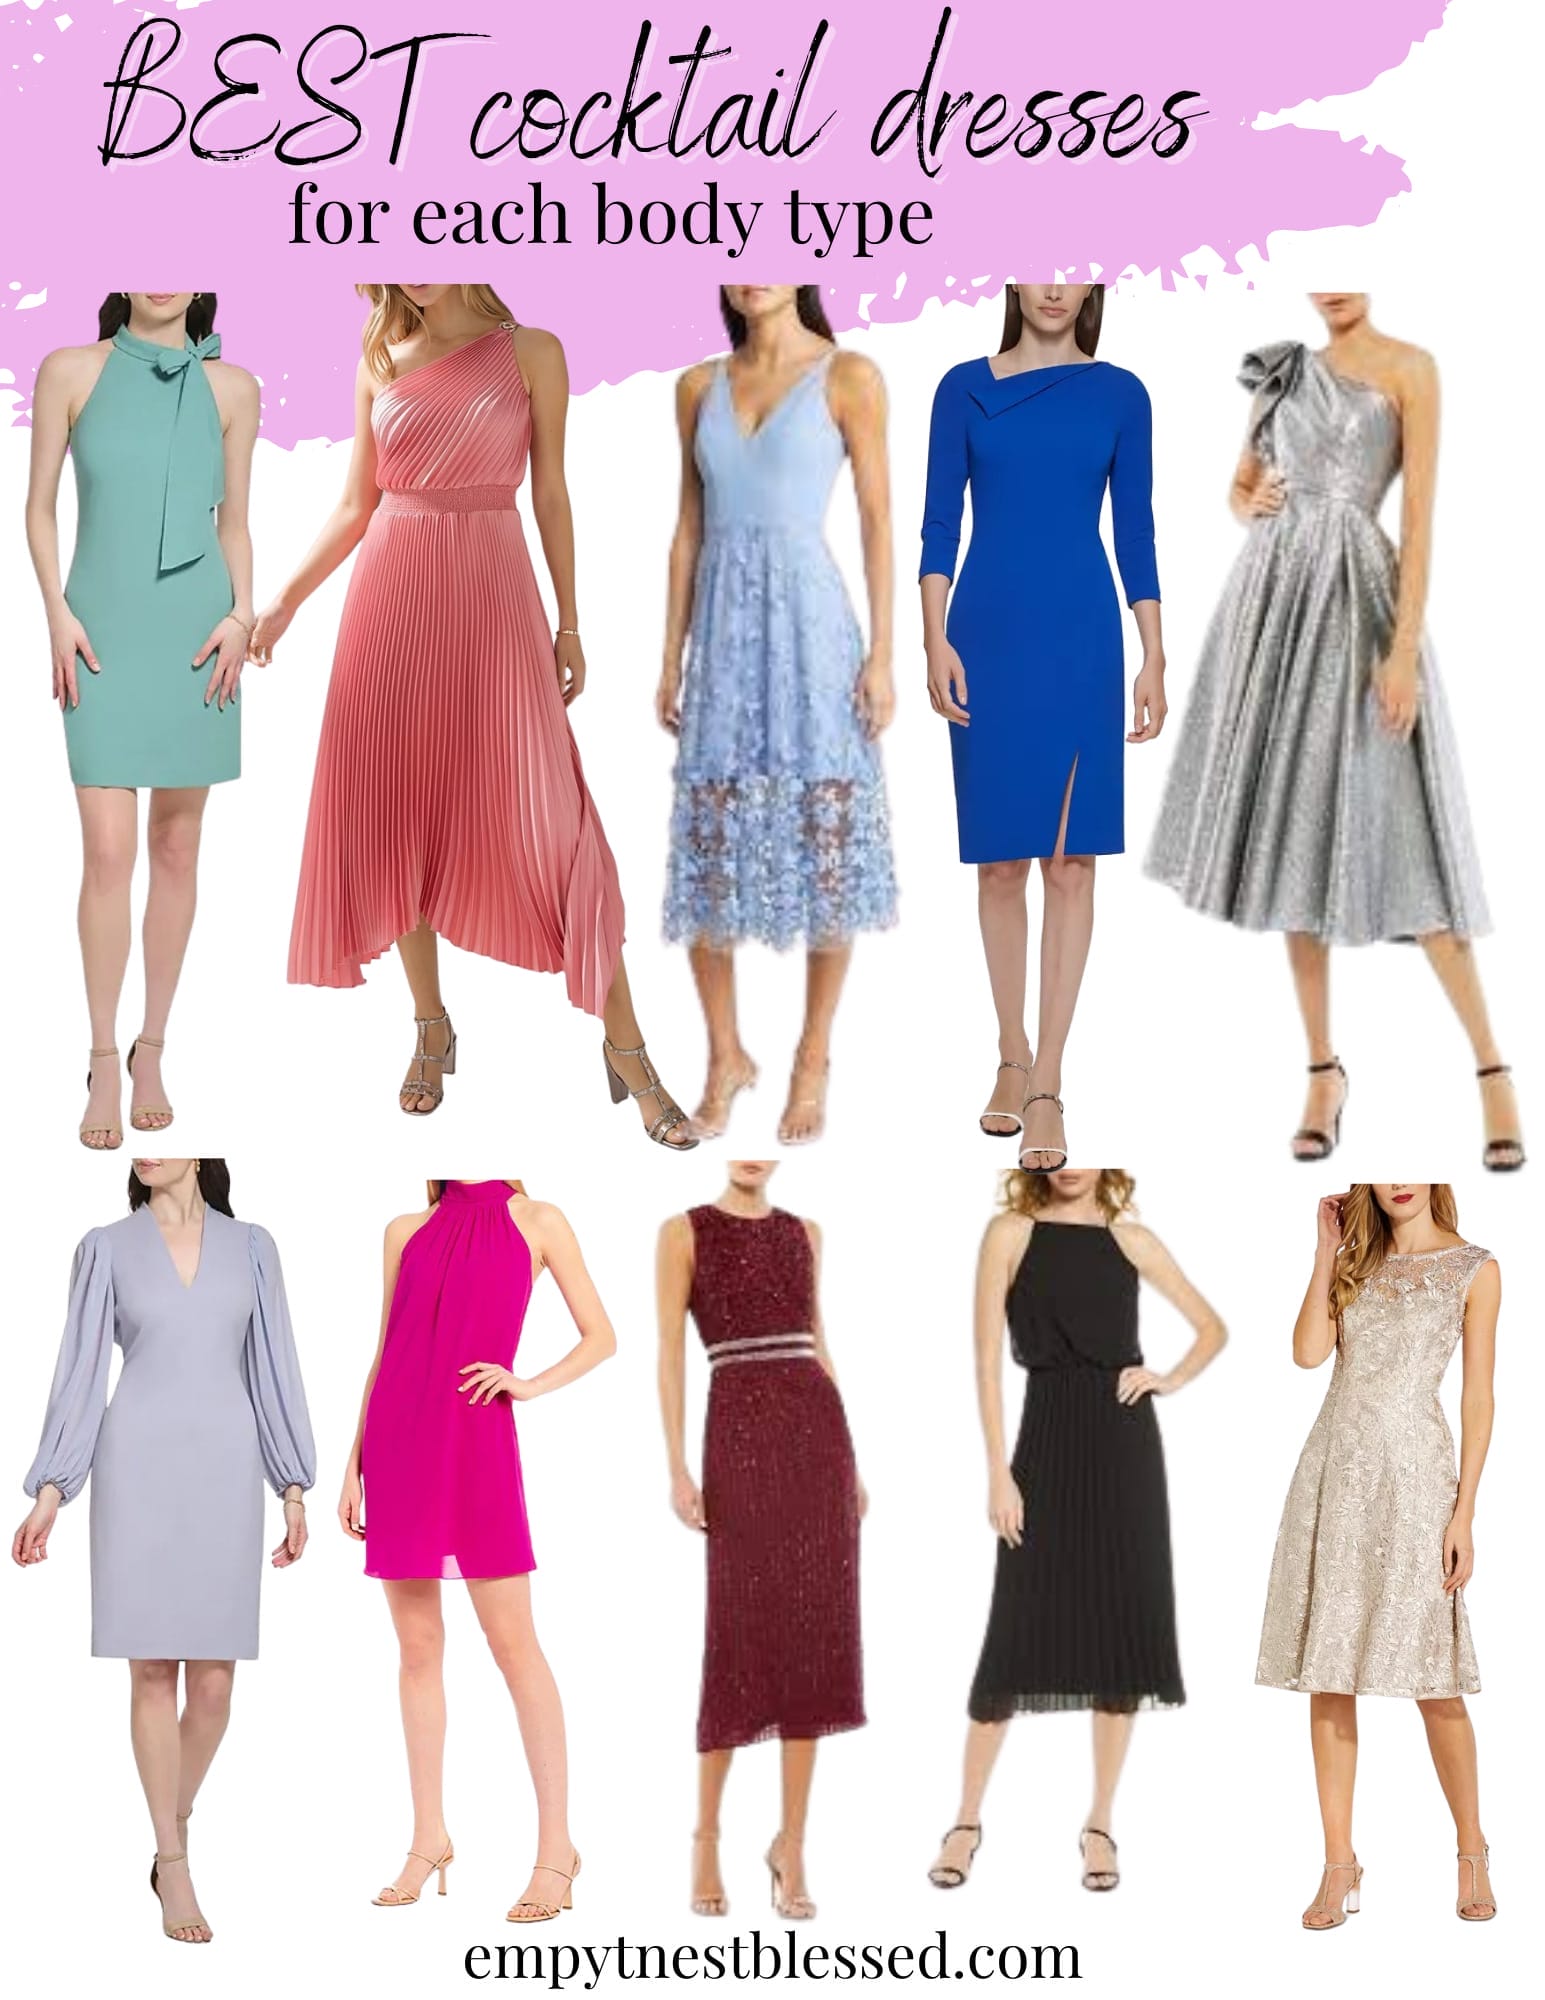 dresses for over 50